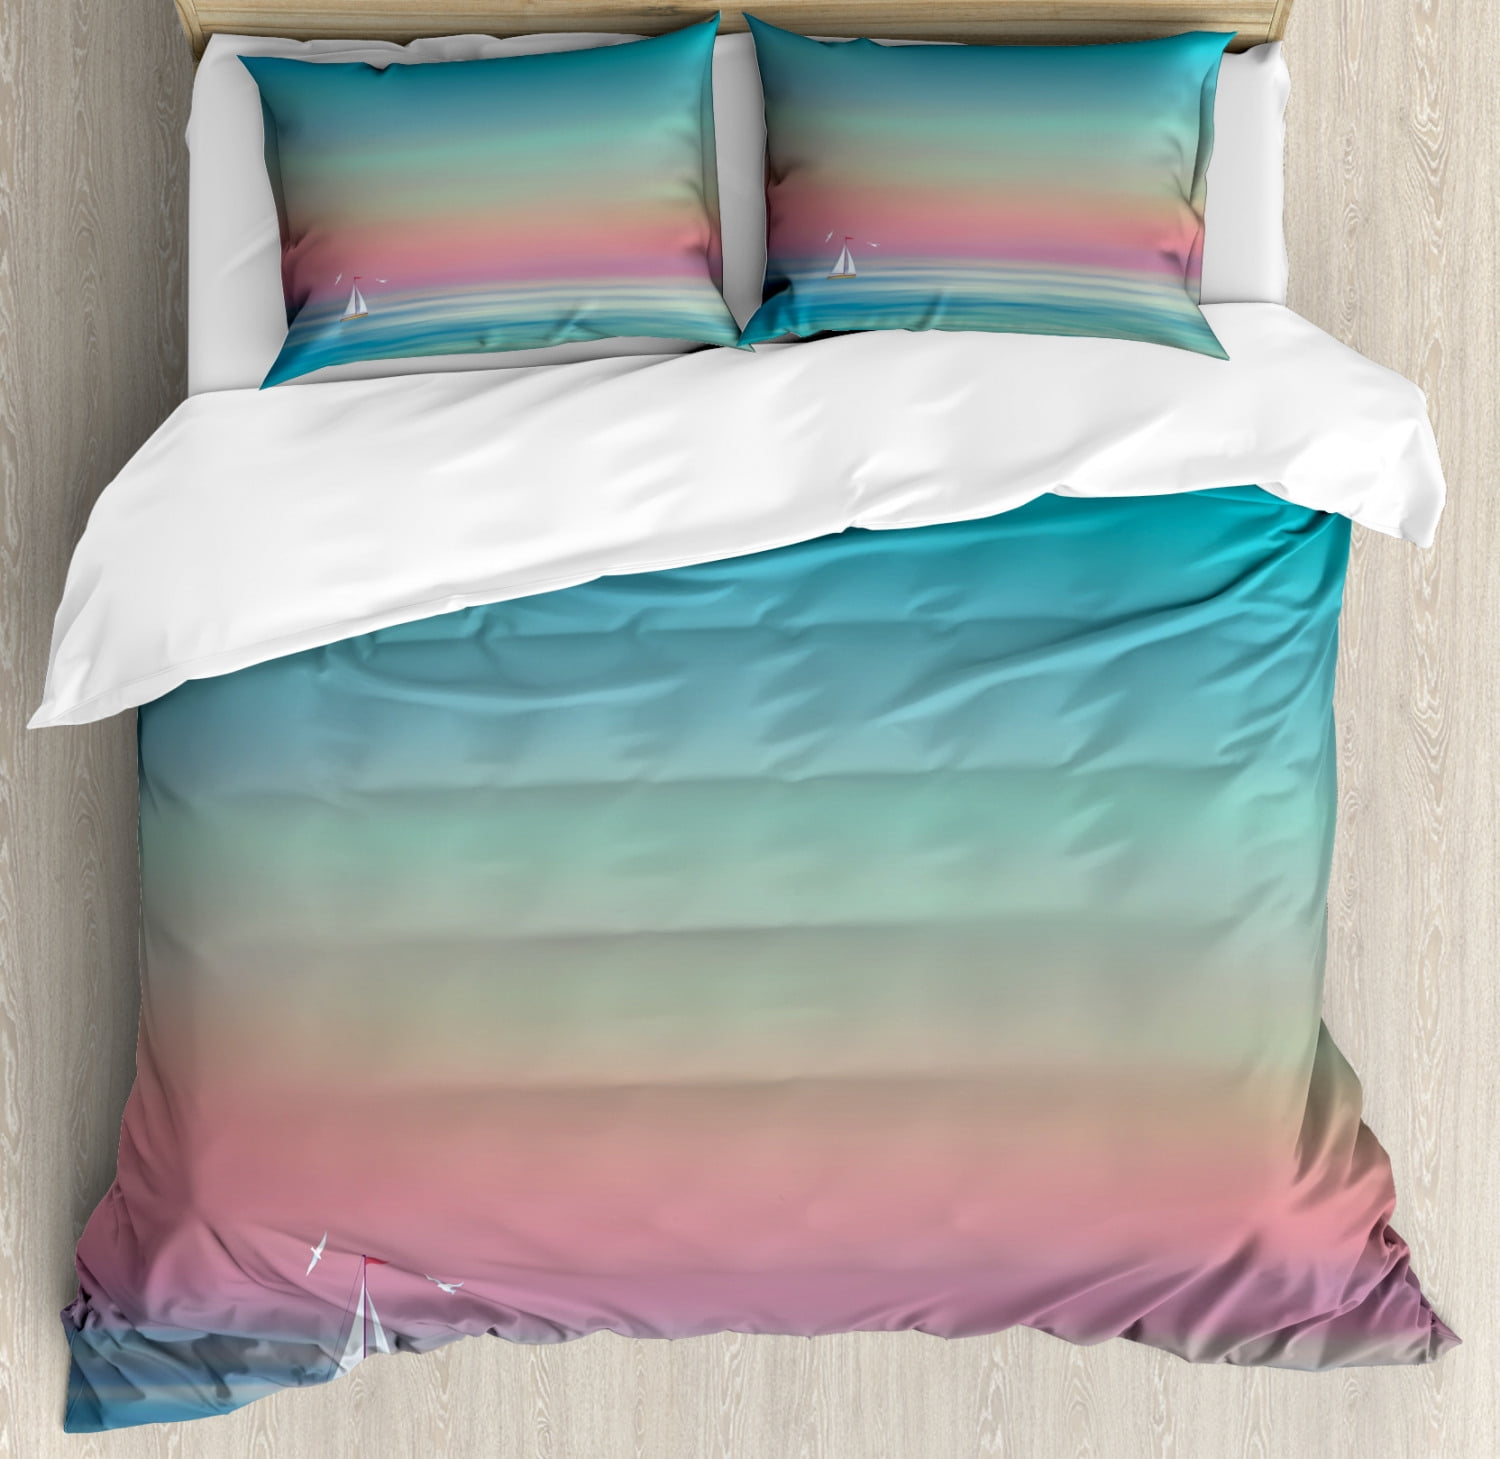 Details about   Exotic Summer Pillow Sham Decorative Pillowcase 3 Sizes Bedroom Decor Ambesonne 